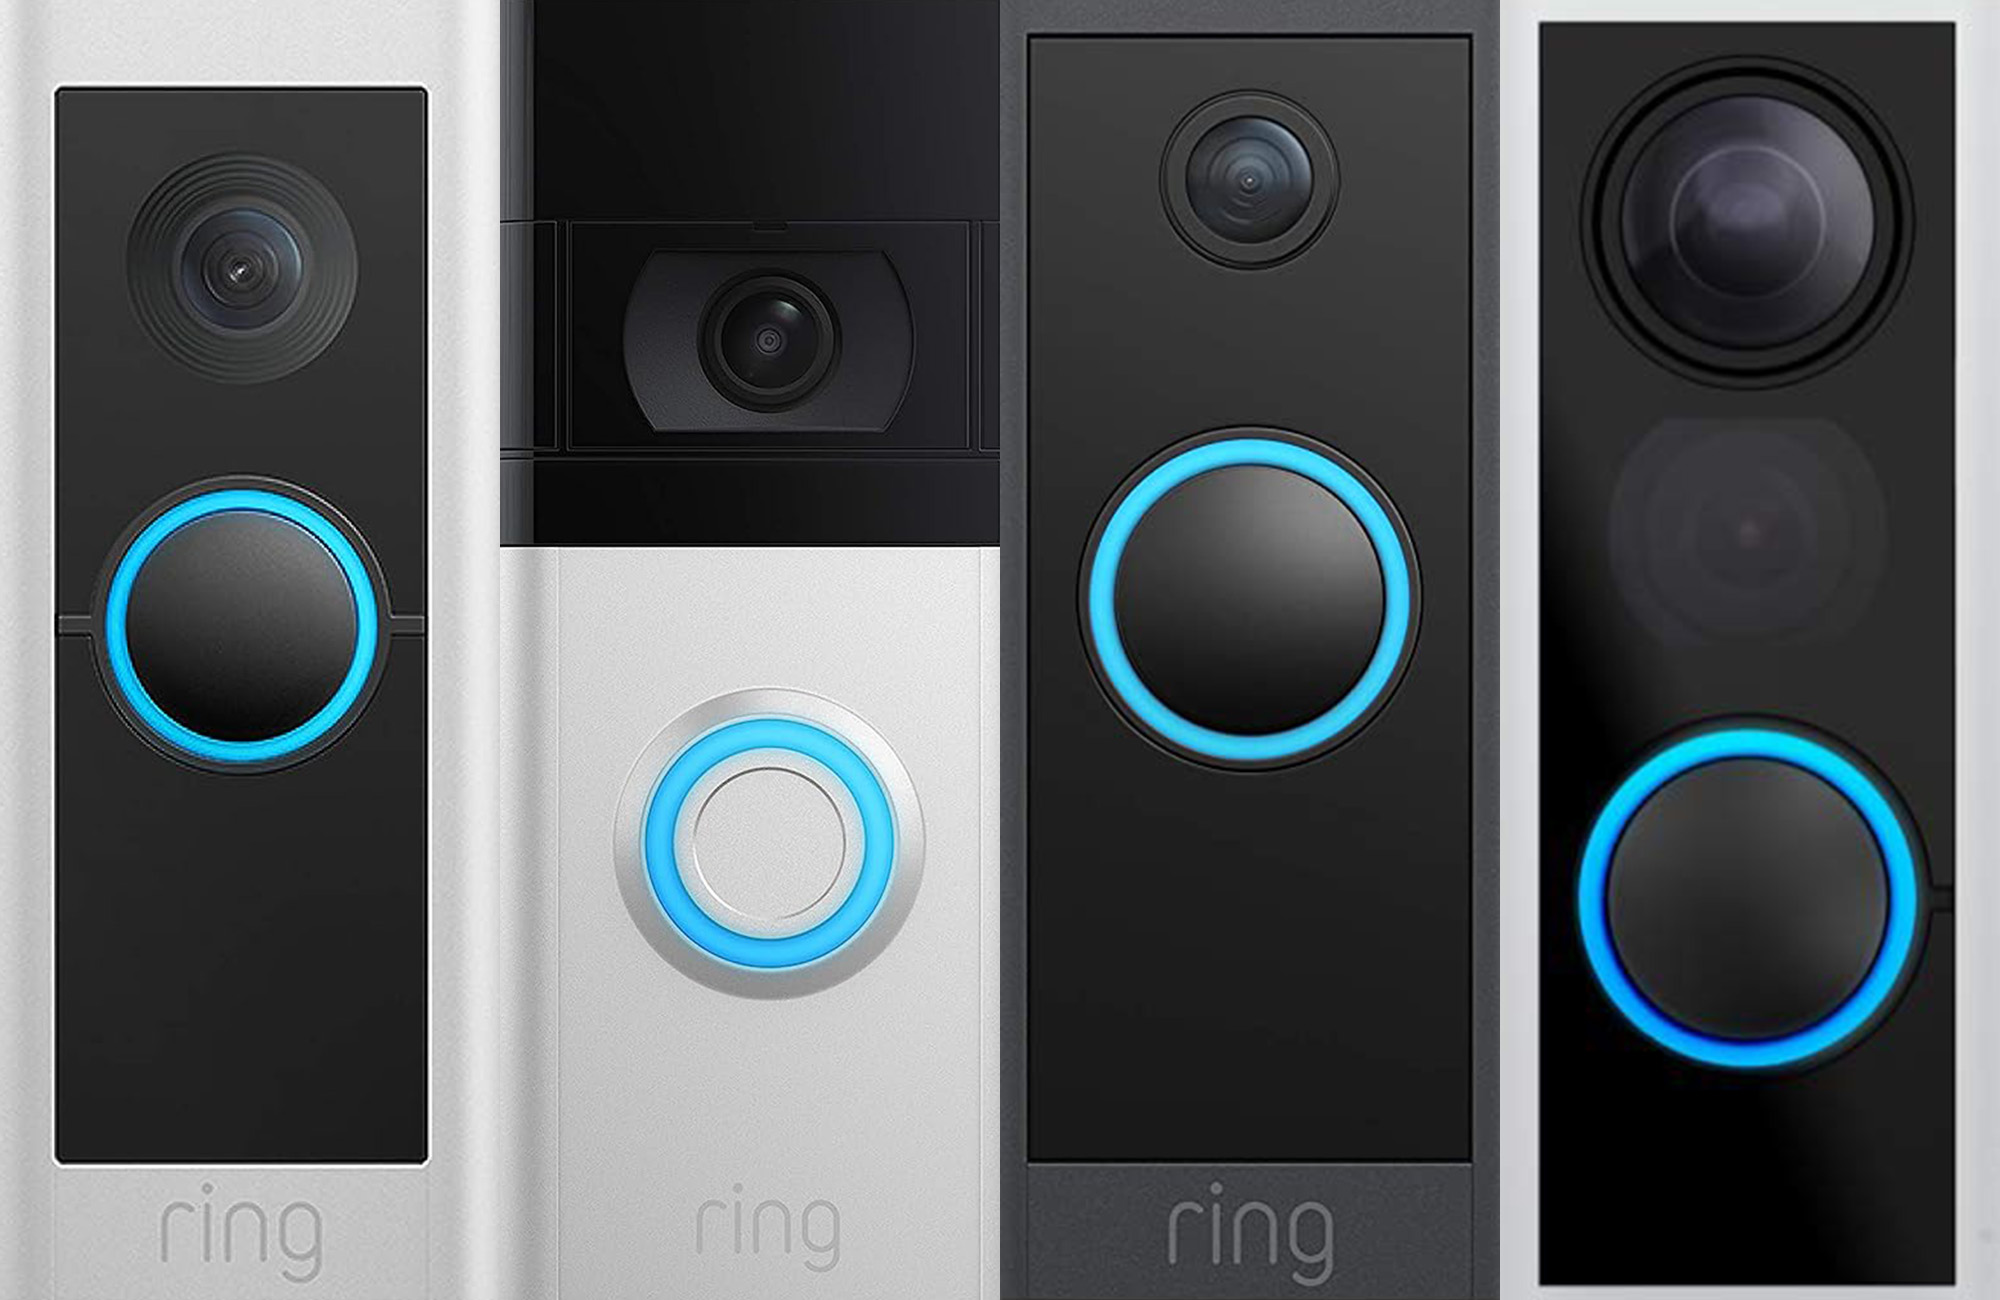 Using Ring Devices Without A Subscription: What Won't Work